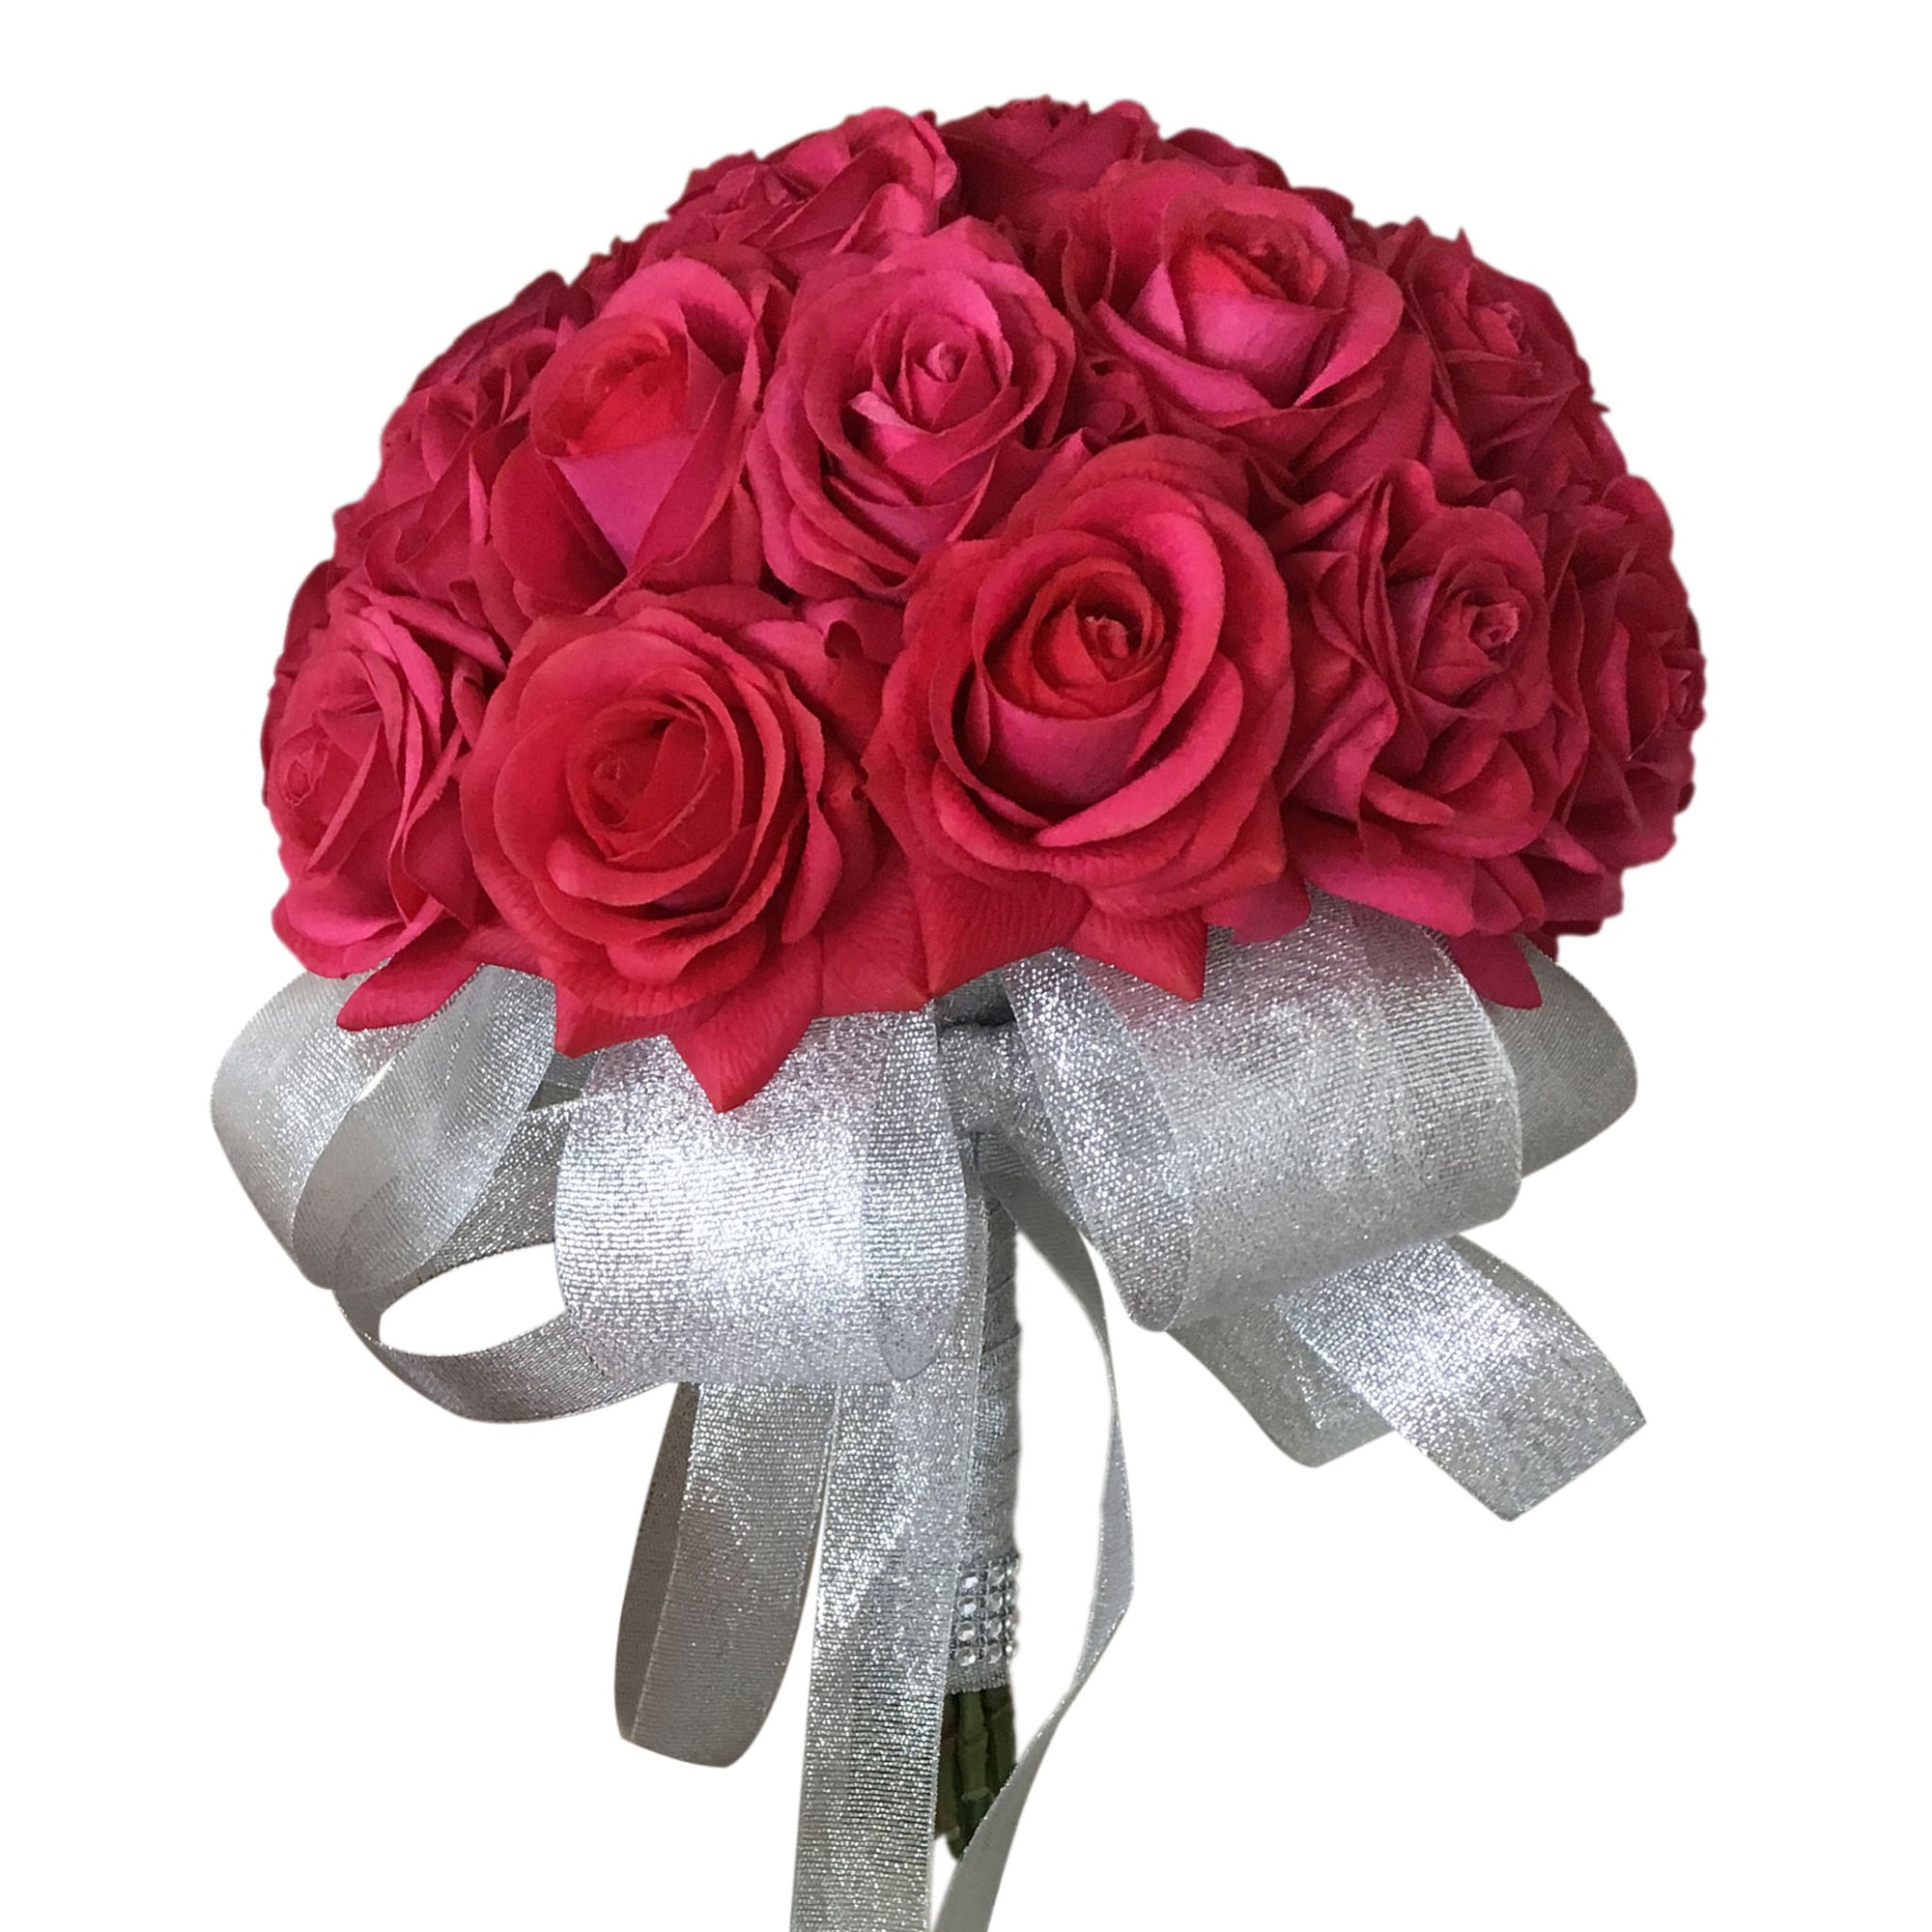 Real Touch Flower Wedding Bouquets Sets Fuchsia Champagne